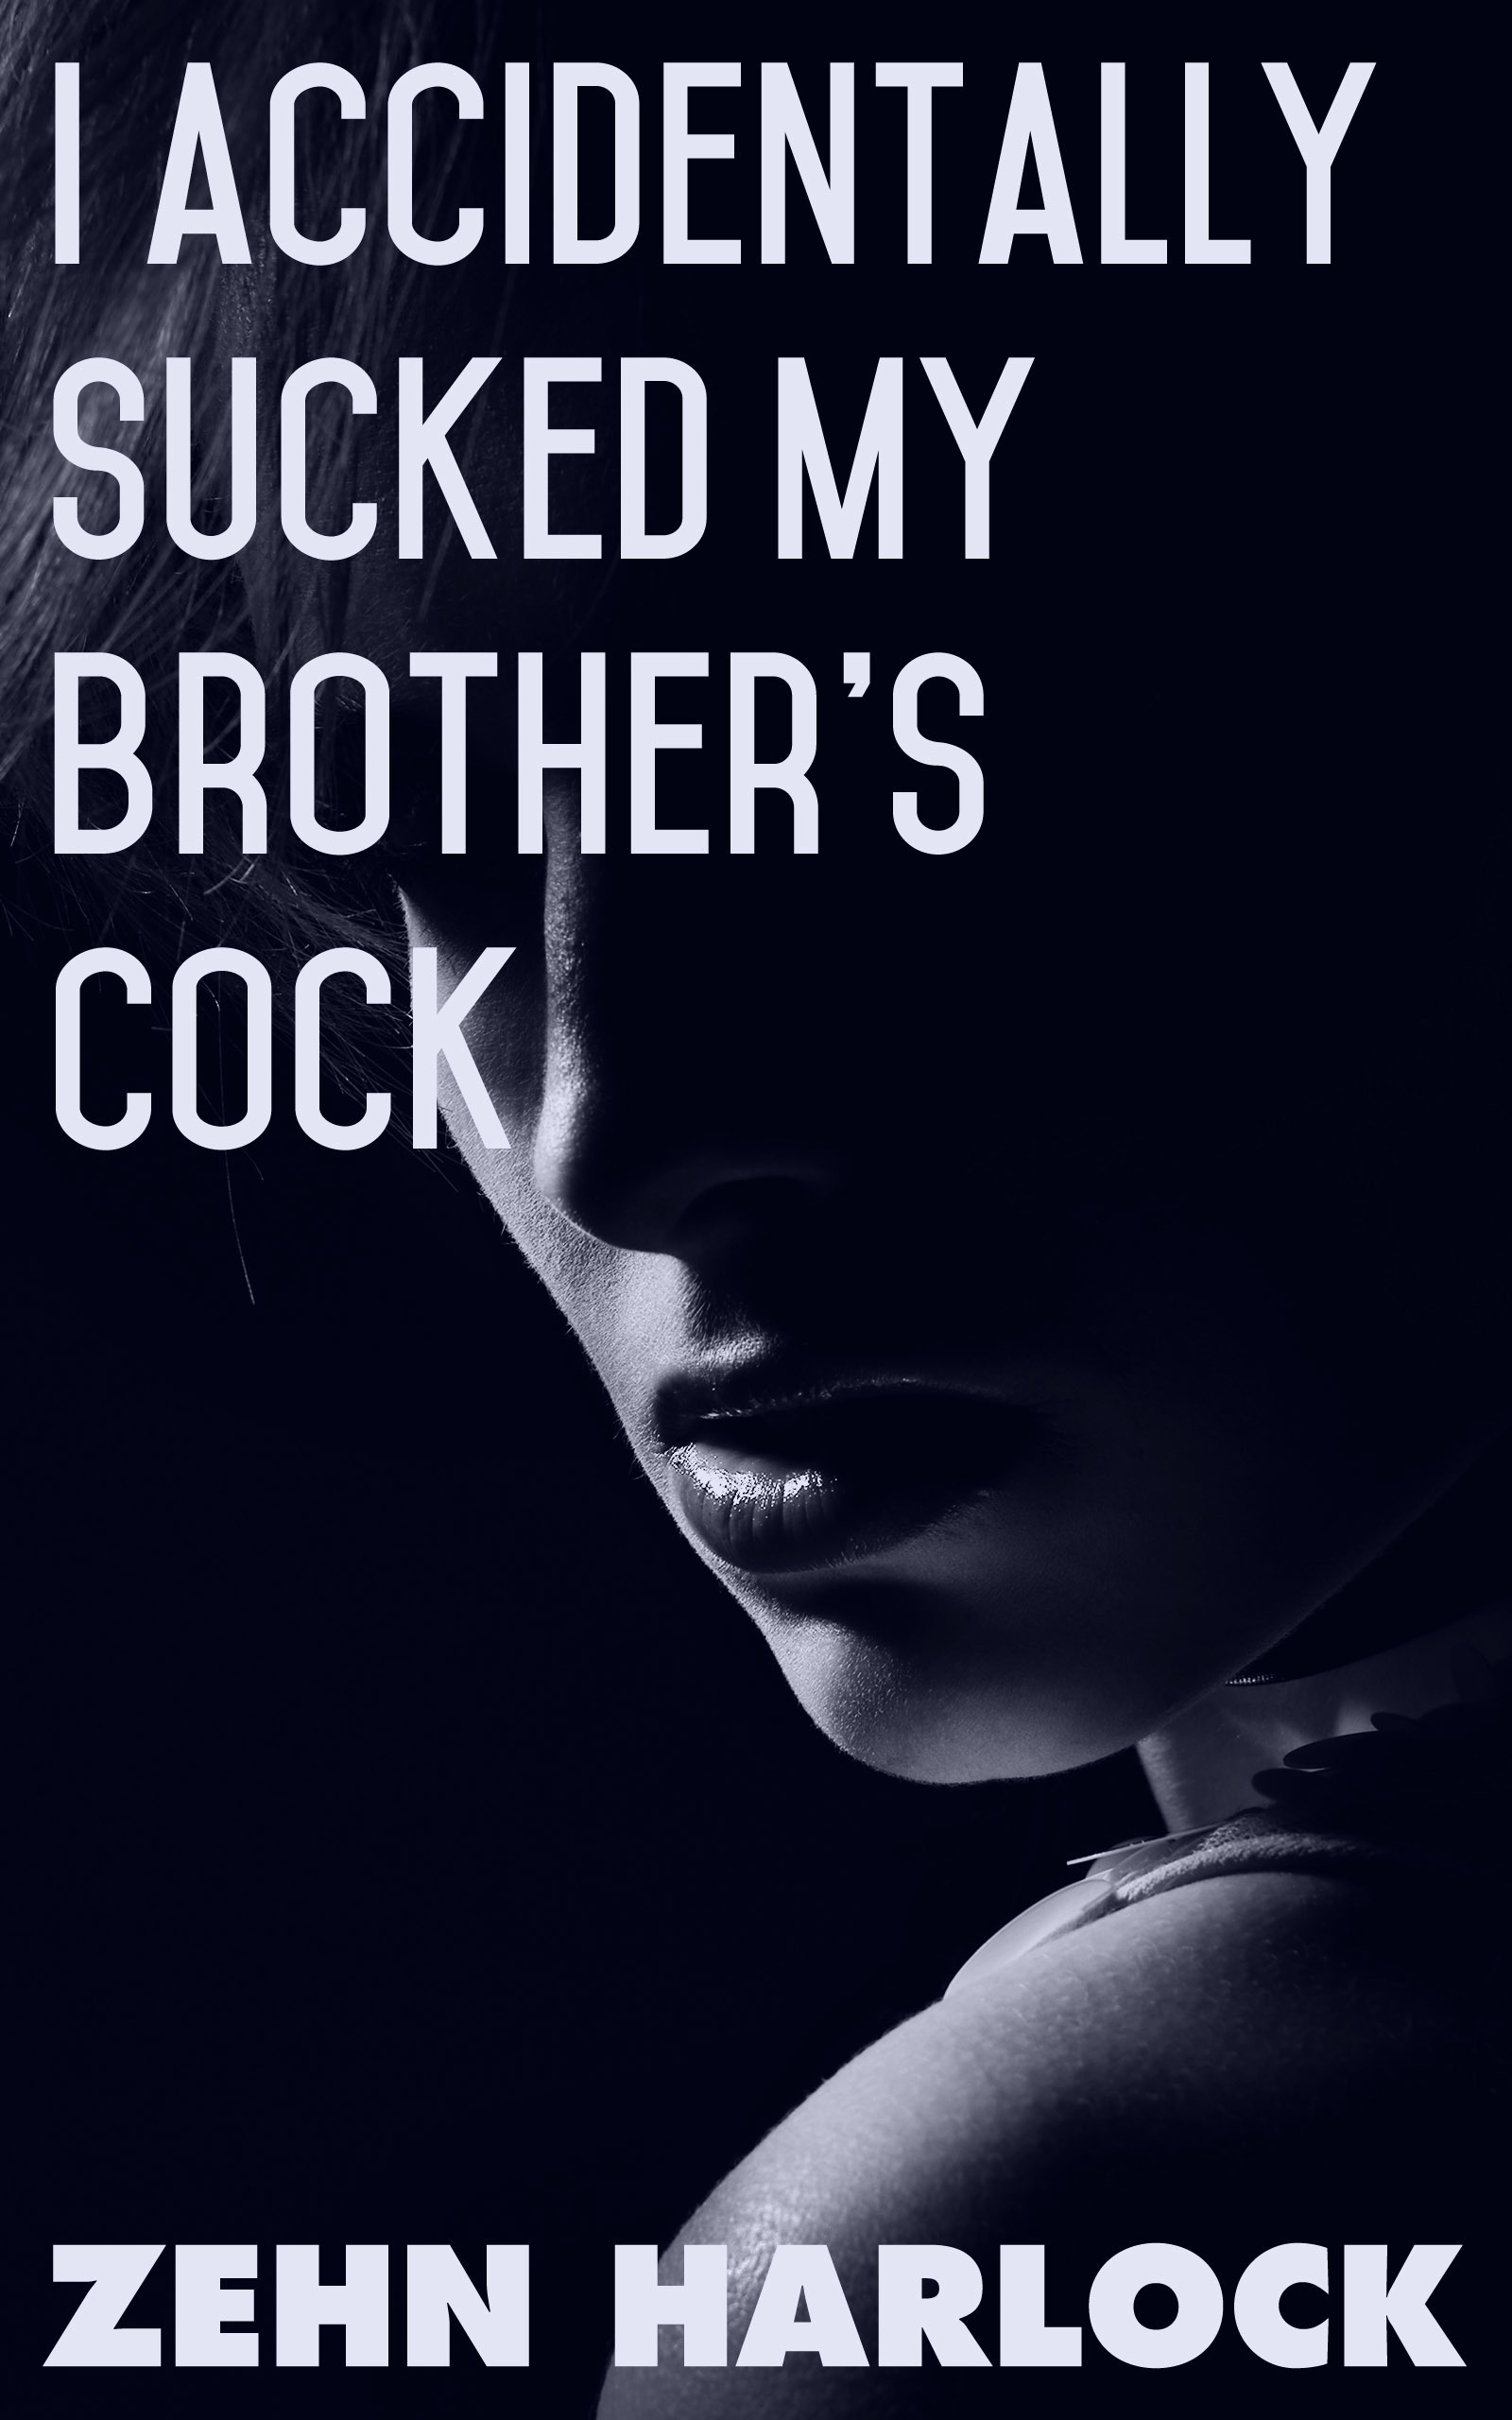 christine packham recommends i sucked my brothers cock pic